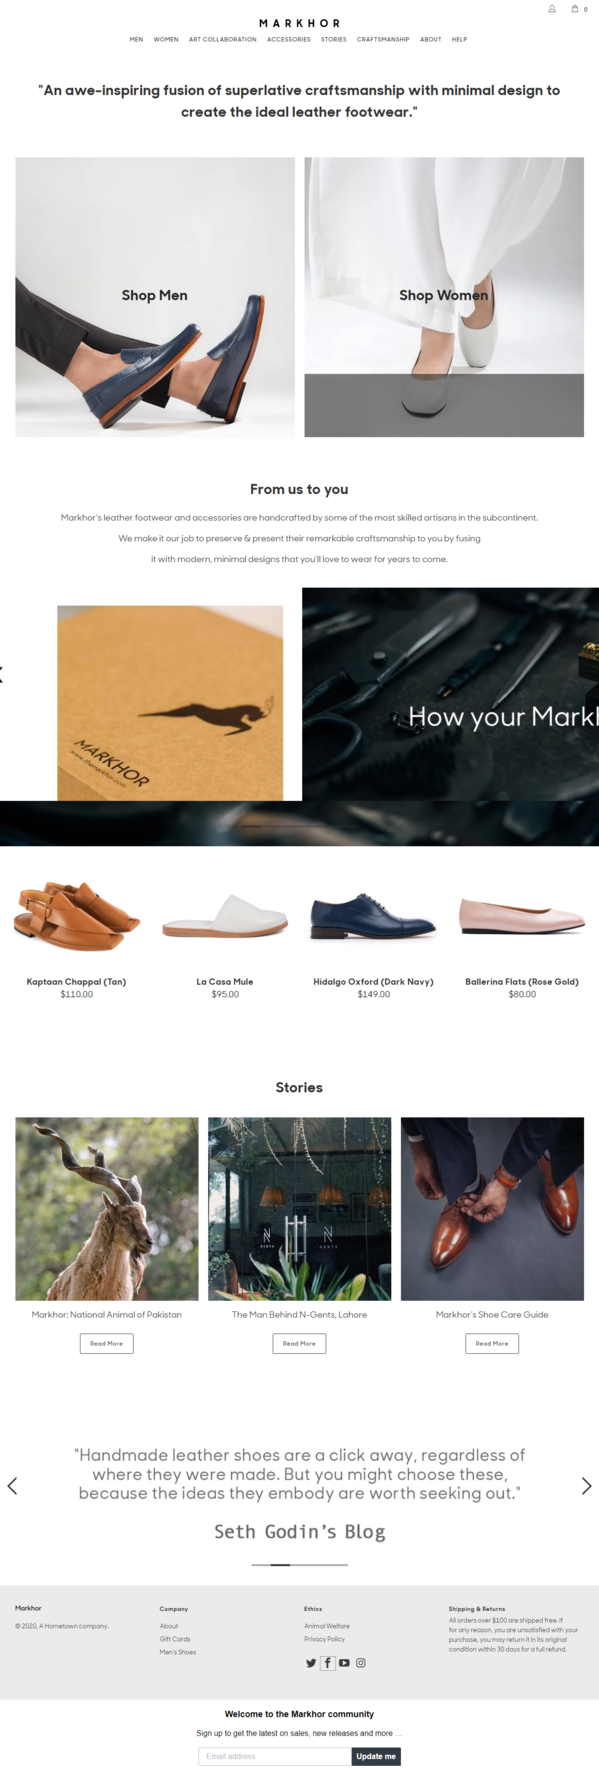 Markhor - Handmade Leather Shoes & Accessories - markhor.com.png